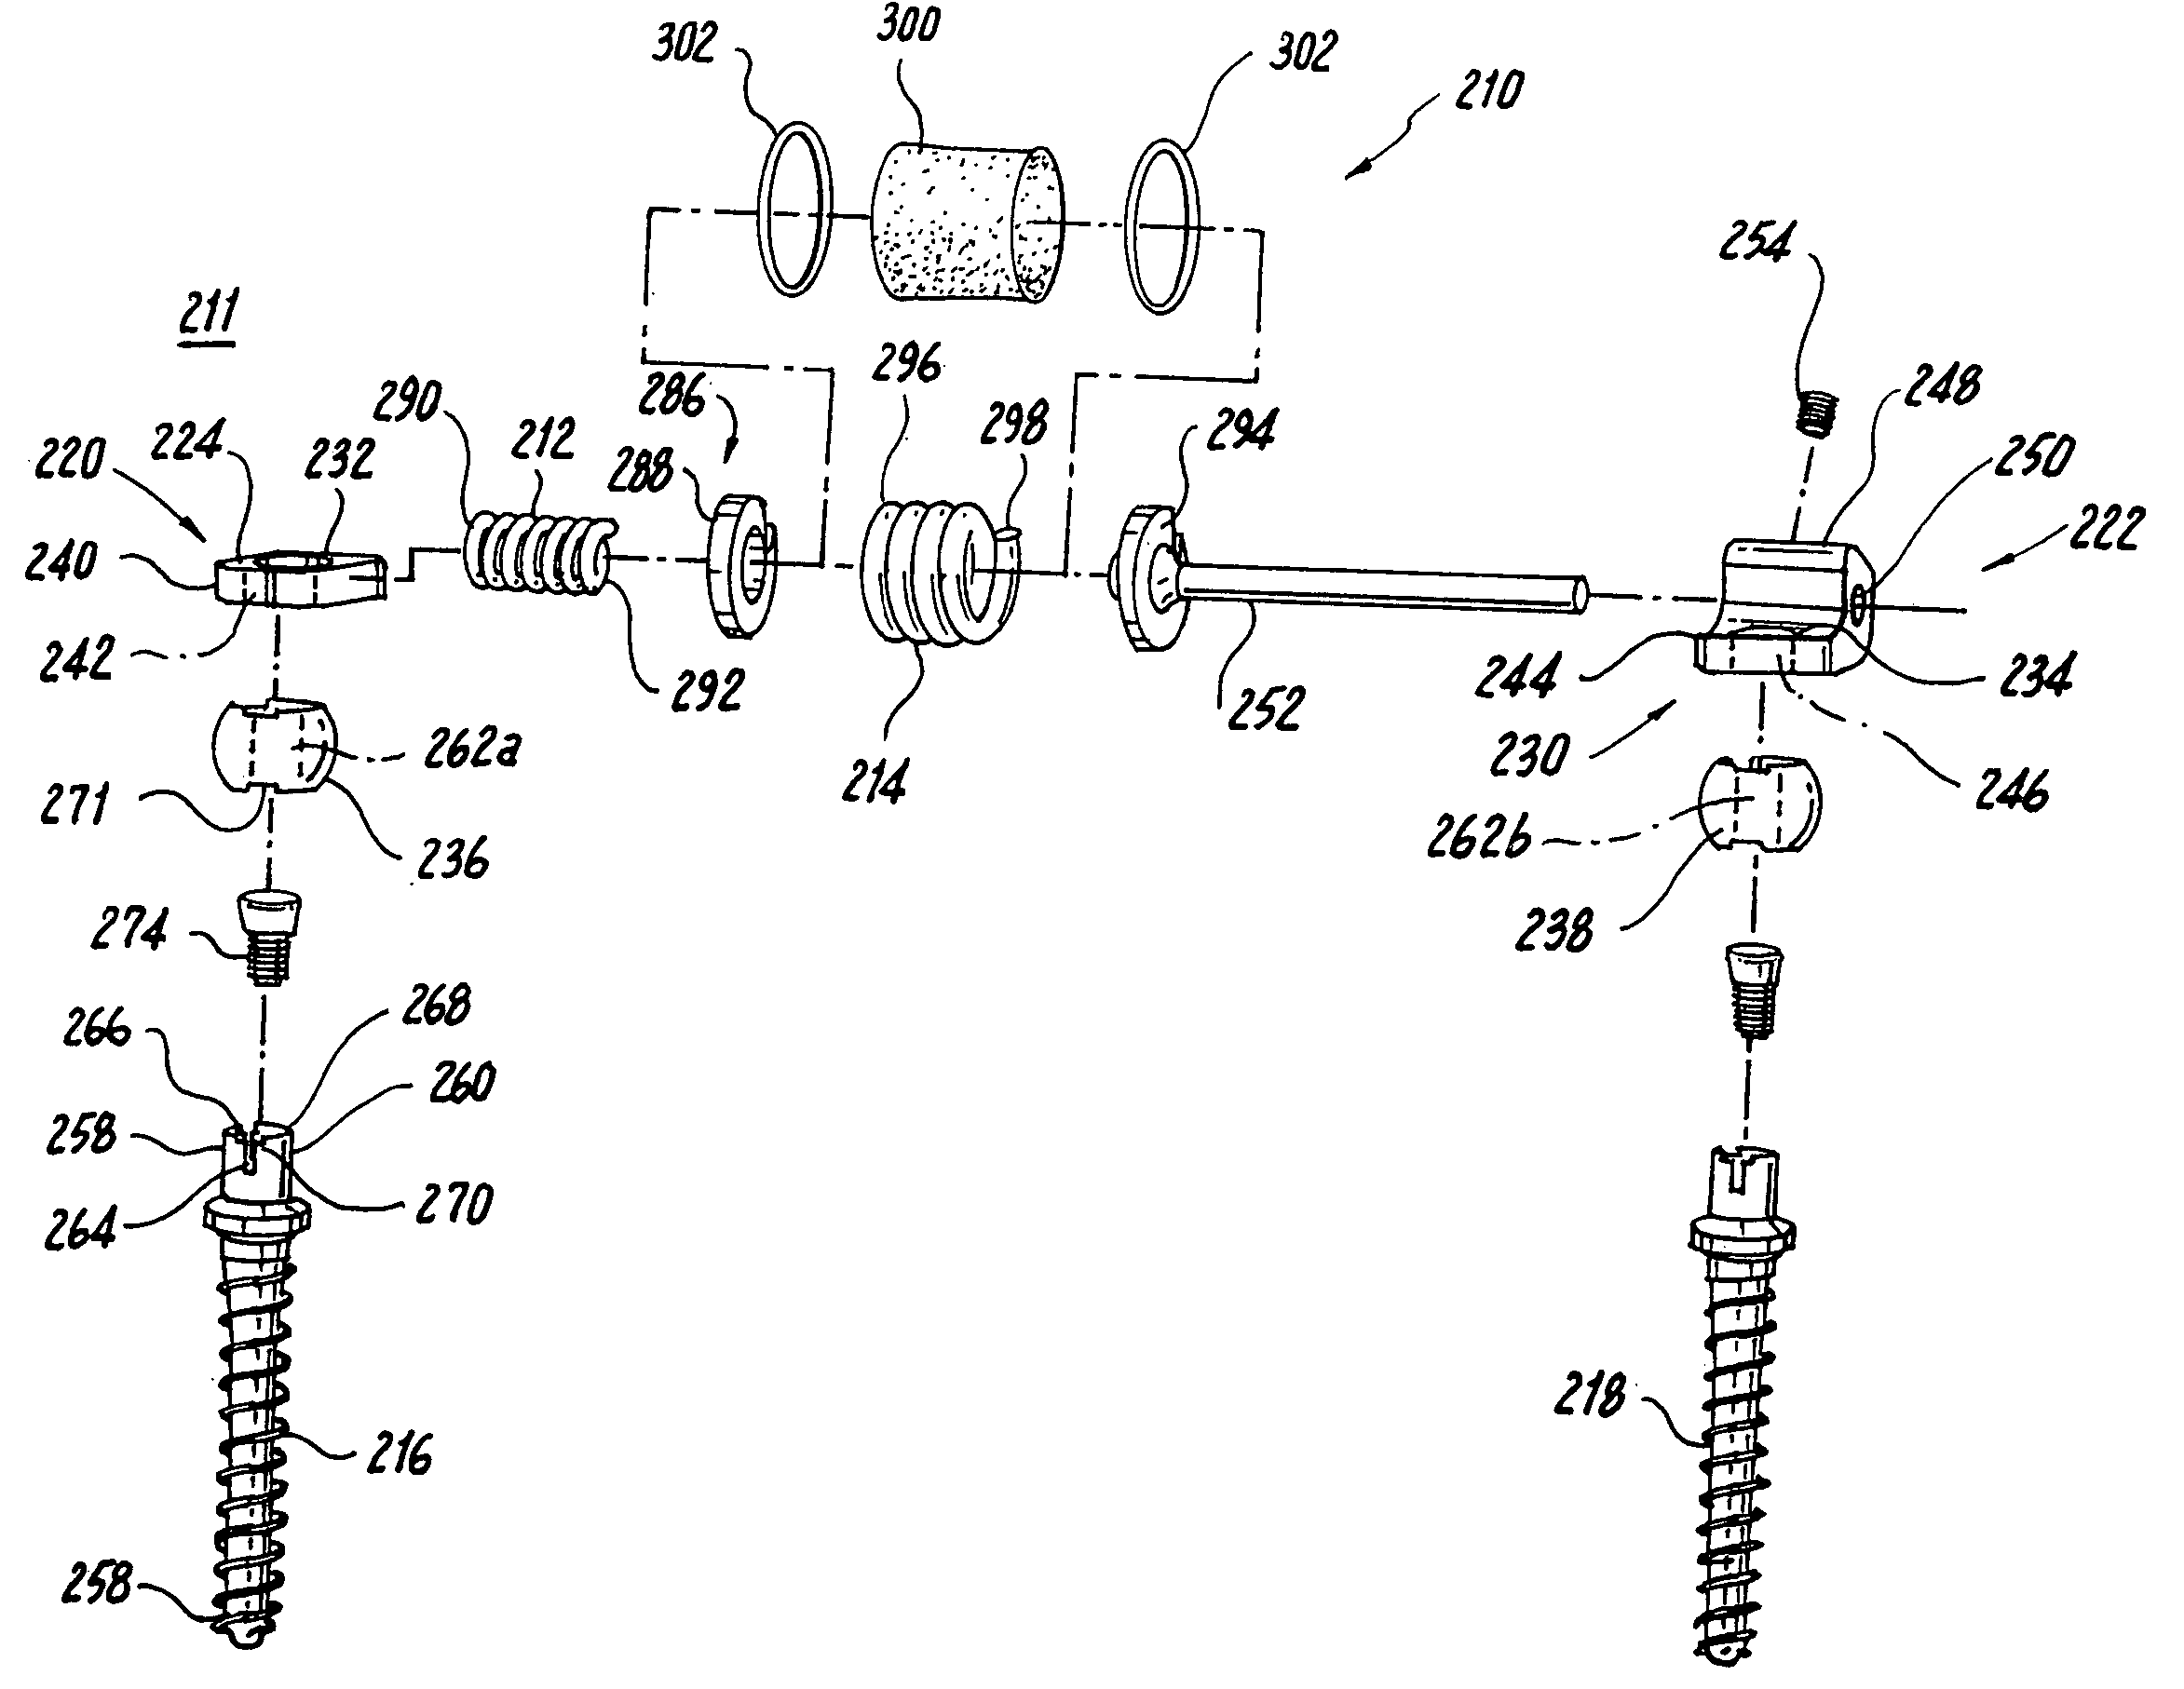 Spine stabilization systems, devices and methods